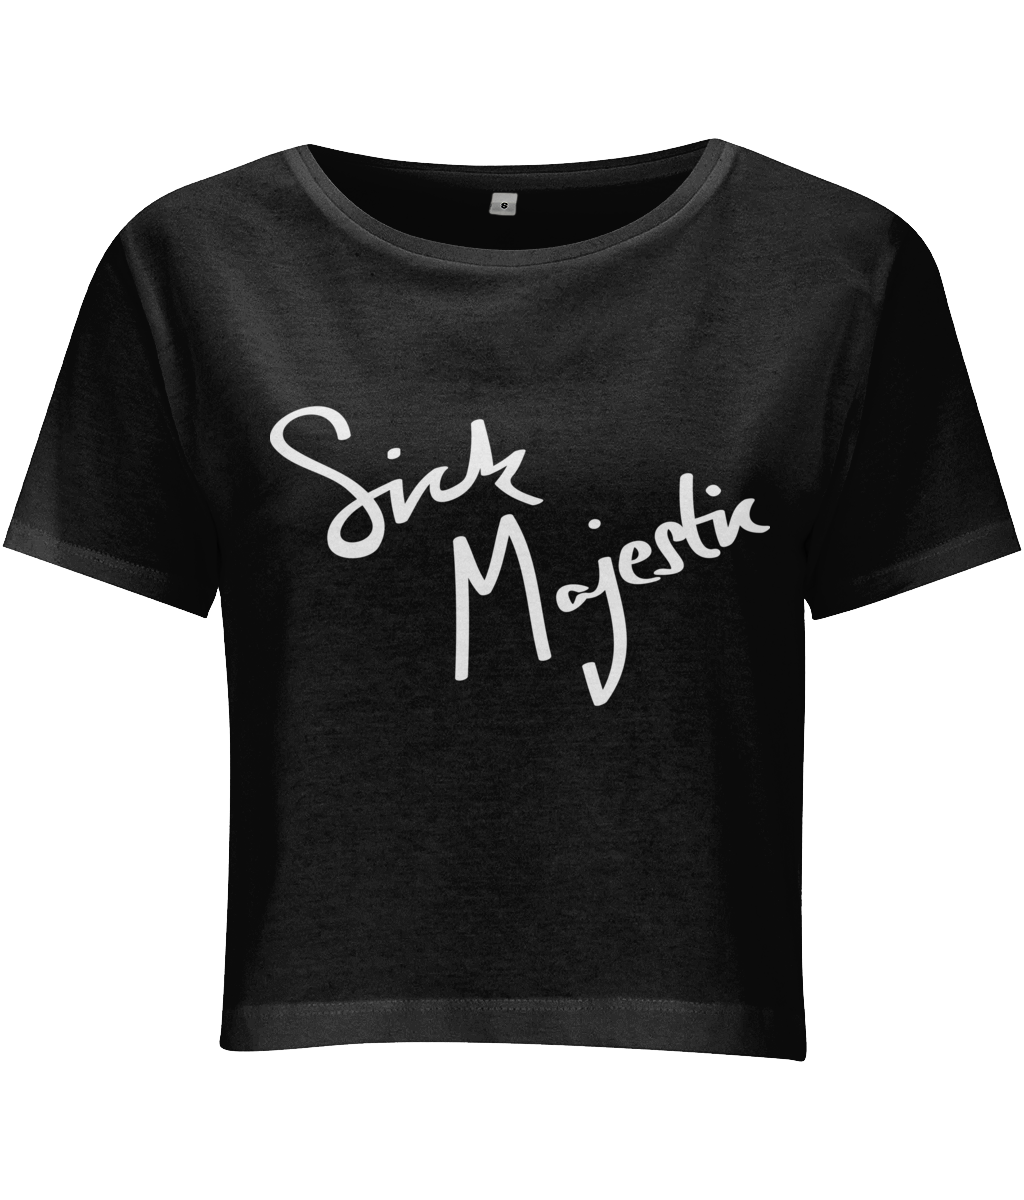 Women's Sick Majestic Signature with logo on back Cropped Jersey Tee